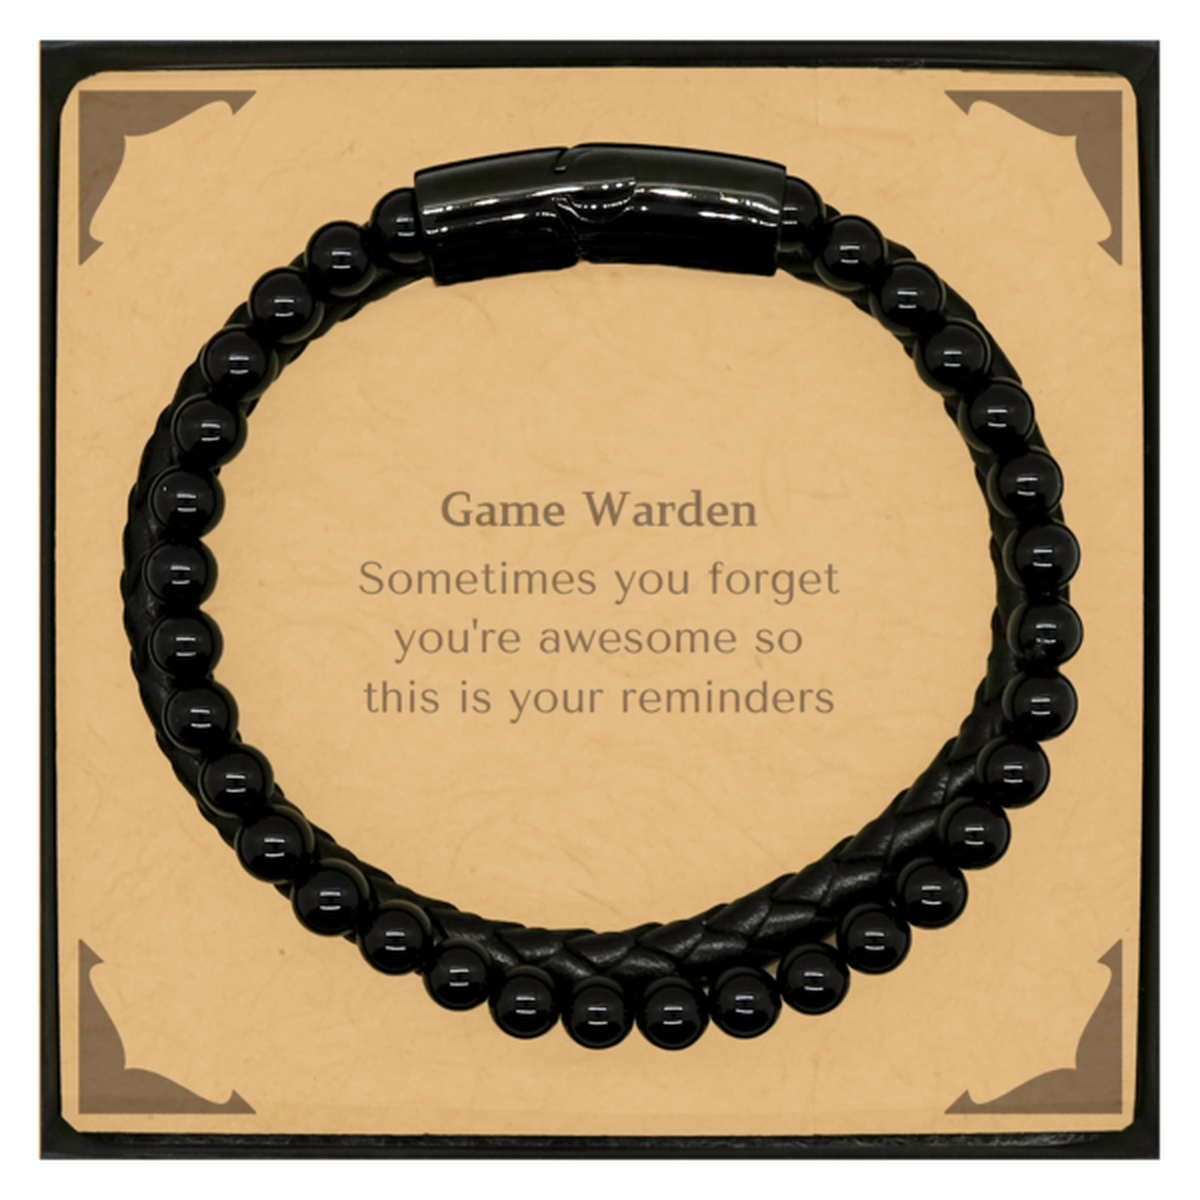 Sentimental Game Warden Stone Leather Bracelets, Game Warden Sometimes you forget you're awesome so this is your reminders, Graduation Christmas Birthday Gifts for Game Warden, Men, Women, Coworkers